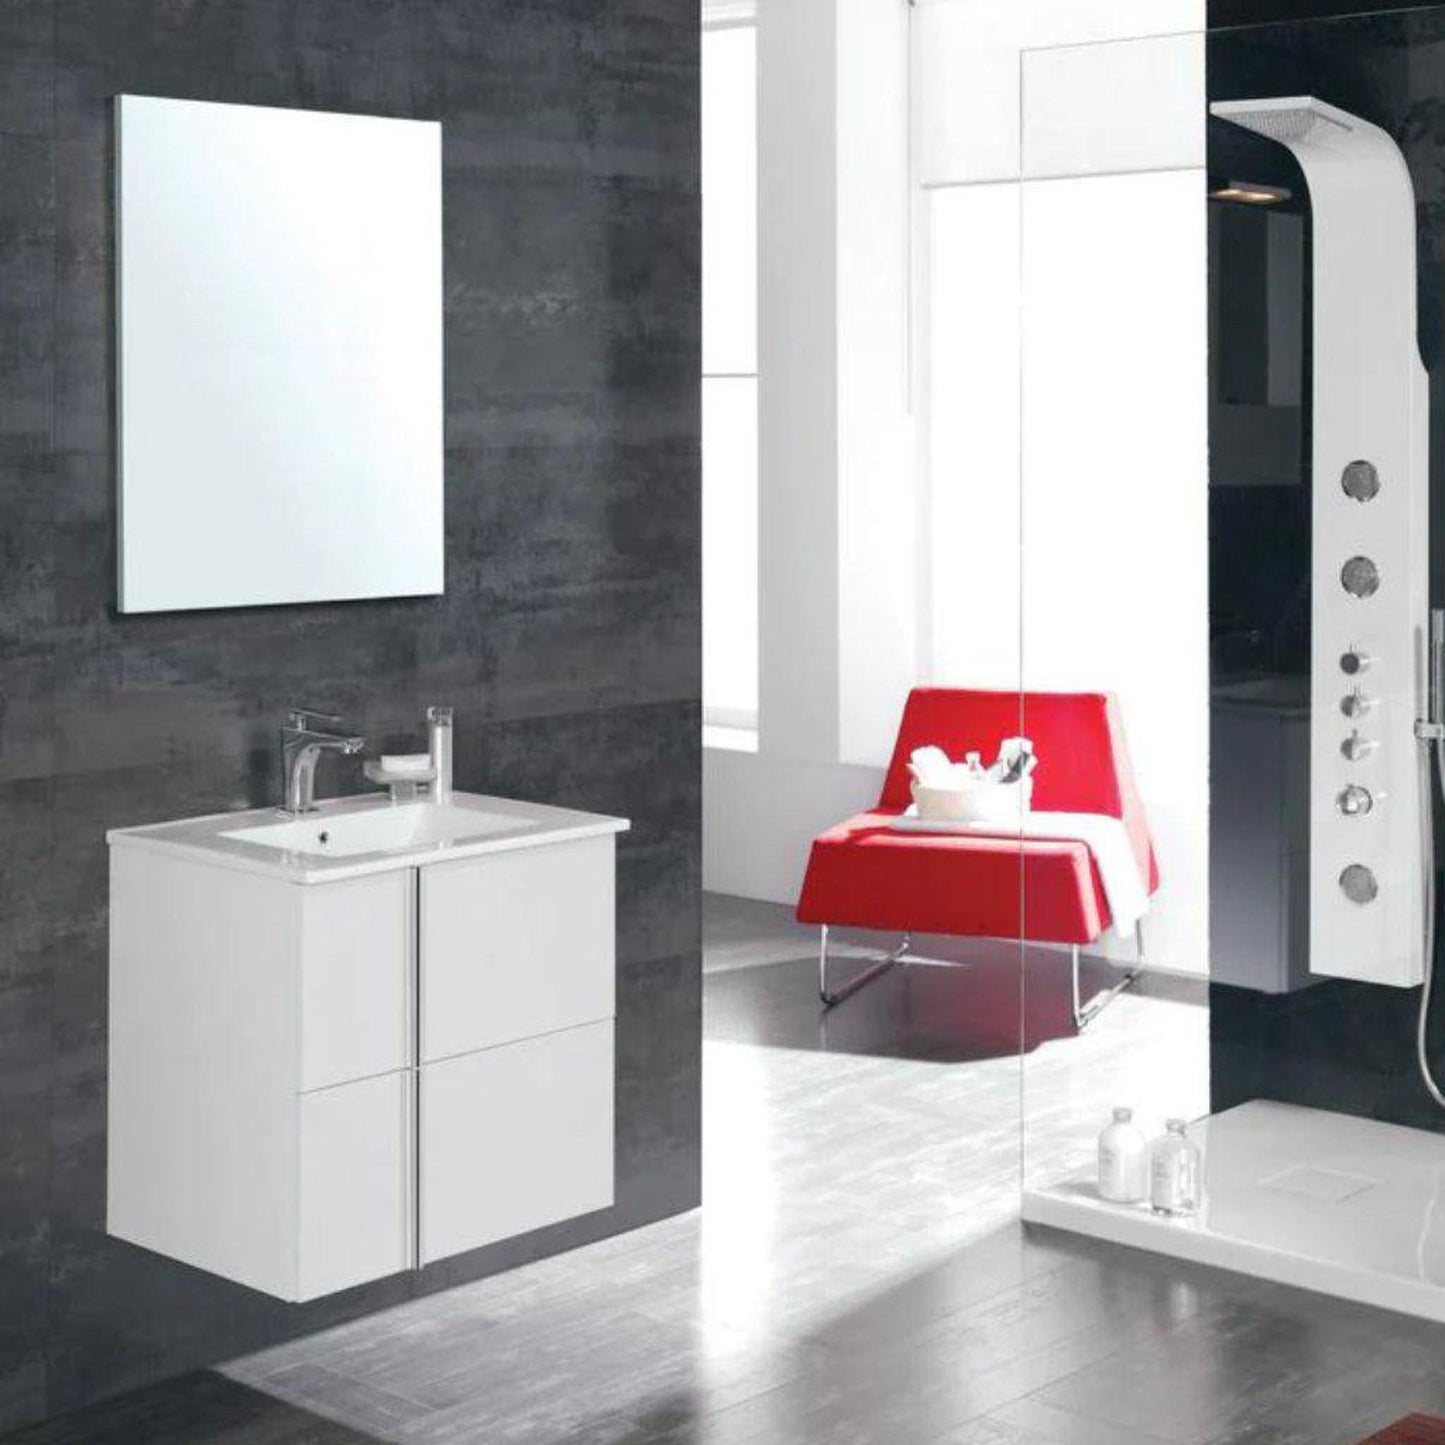 Royo Onix+ 32" x 18" White Modern Wall-mounted Vanity With 2 Drawers and Chrome Handle